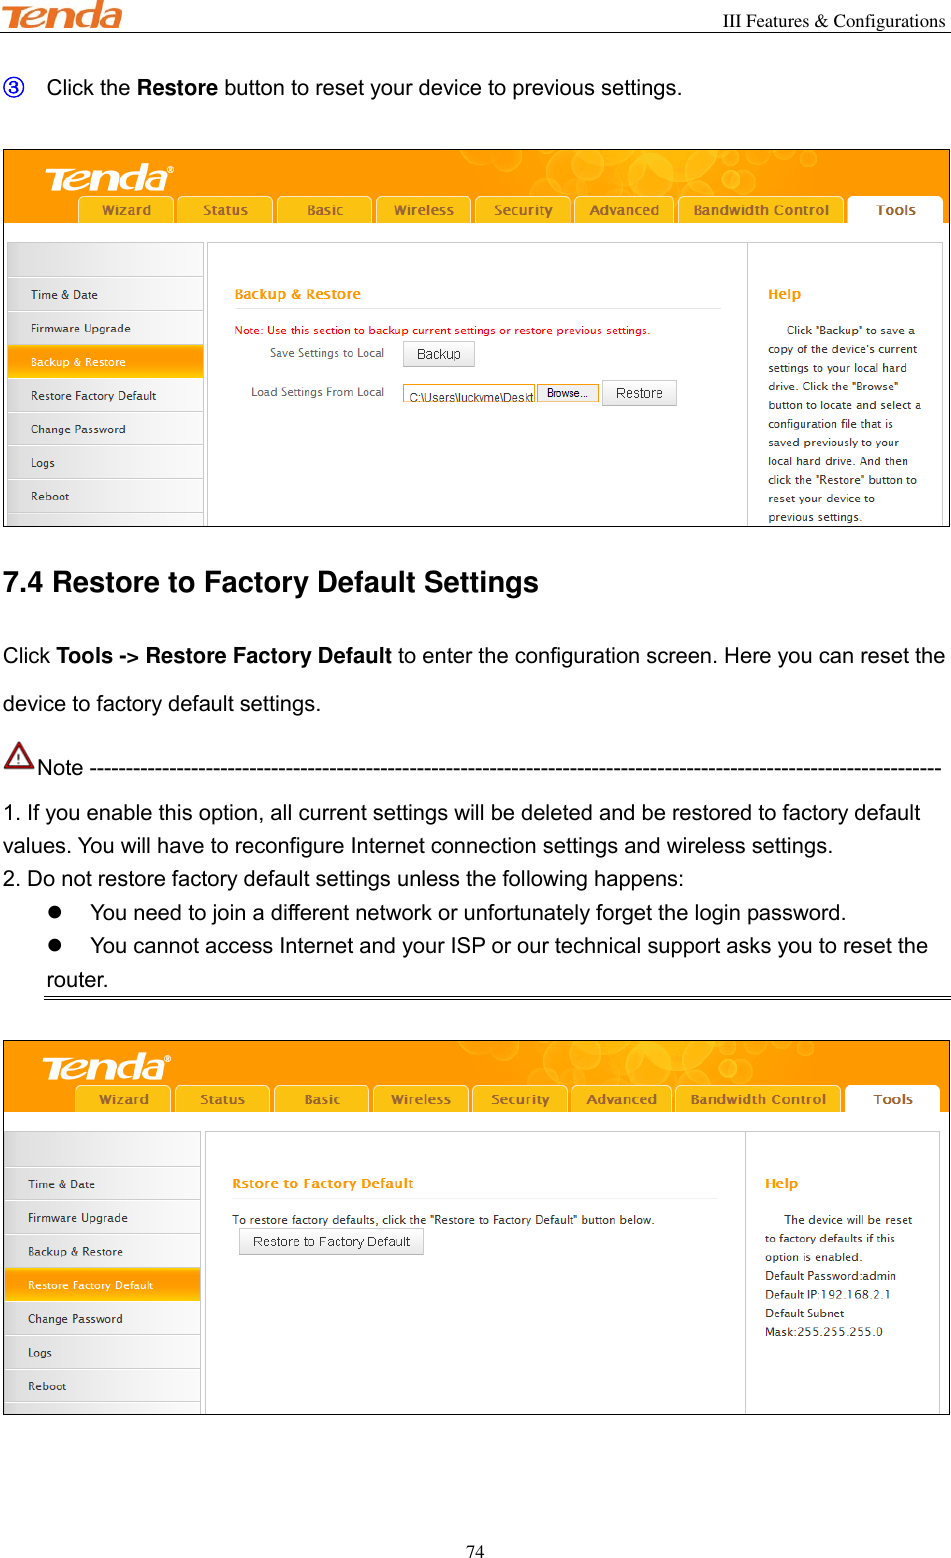                                                        III Features &amp; Configurations           74 ③ Click the Restore button to reset your device to previous settings.   7.4 Restore to Factory Default Settings Click Tools -&gt; Restore Factory Default to enter the configuration screen. Here you can reset the device to factory default settings. Note --------------------------------------------------------------------------------------------------------------------- 1. If you enable this option, all current settings will be deleted and be restored to factory default values. You will have to reconfigure Internet connection settings and wireless settings. 2. Do not restore factory default settings unless the following happens:   You need to join a different network or unfortunately forget the login password.   You cannot access Internet and your ISP or our technical support asks you to reset the router.    